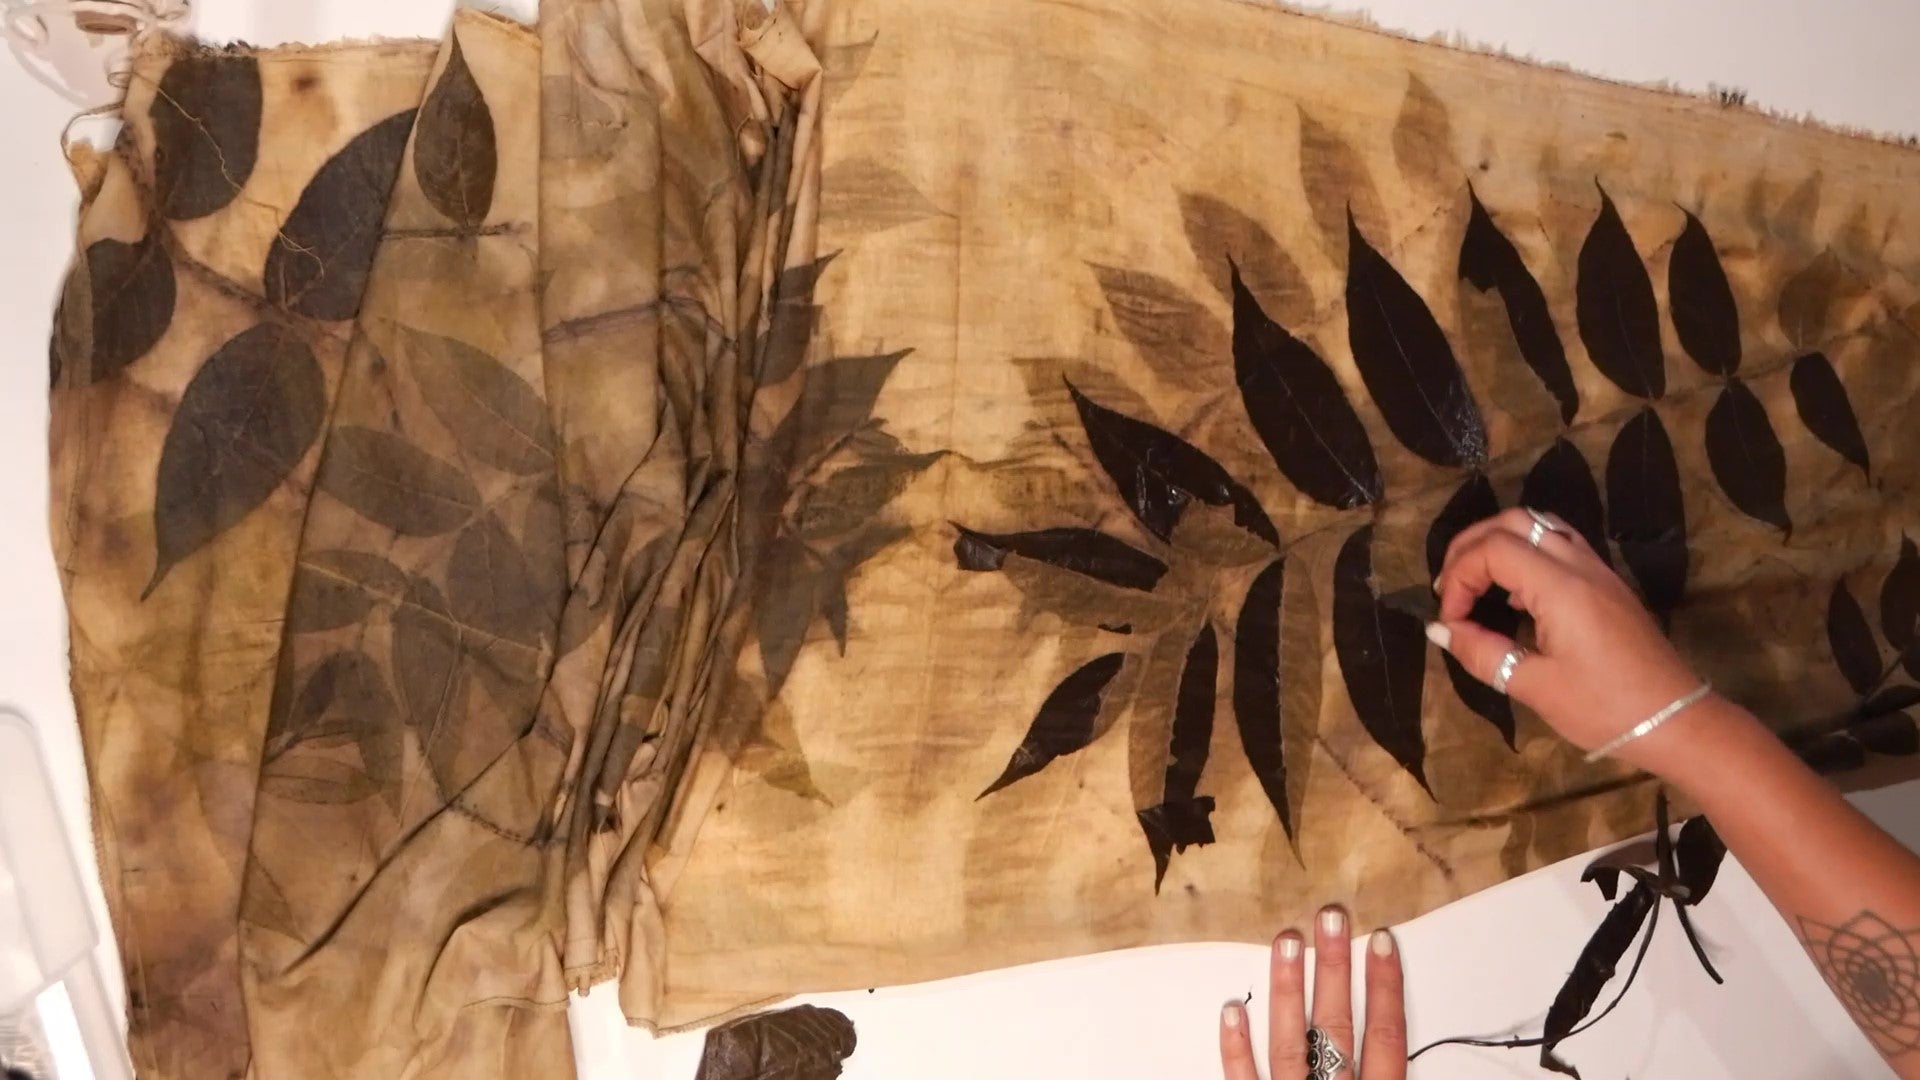 Load video: sped up video showing leaves being pulled off fabric to reveal permanent  print.